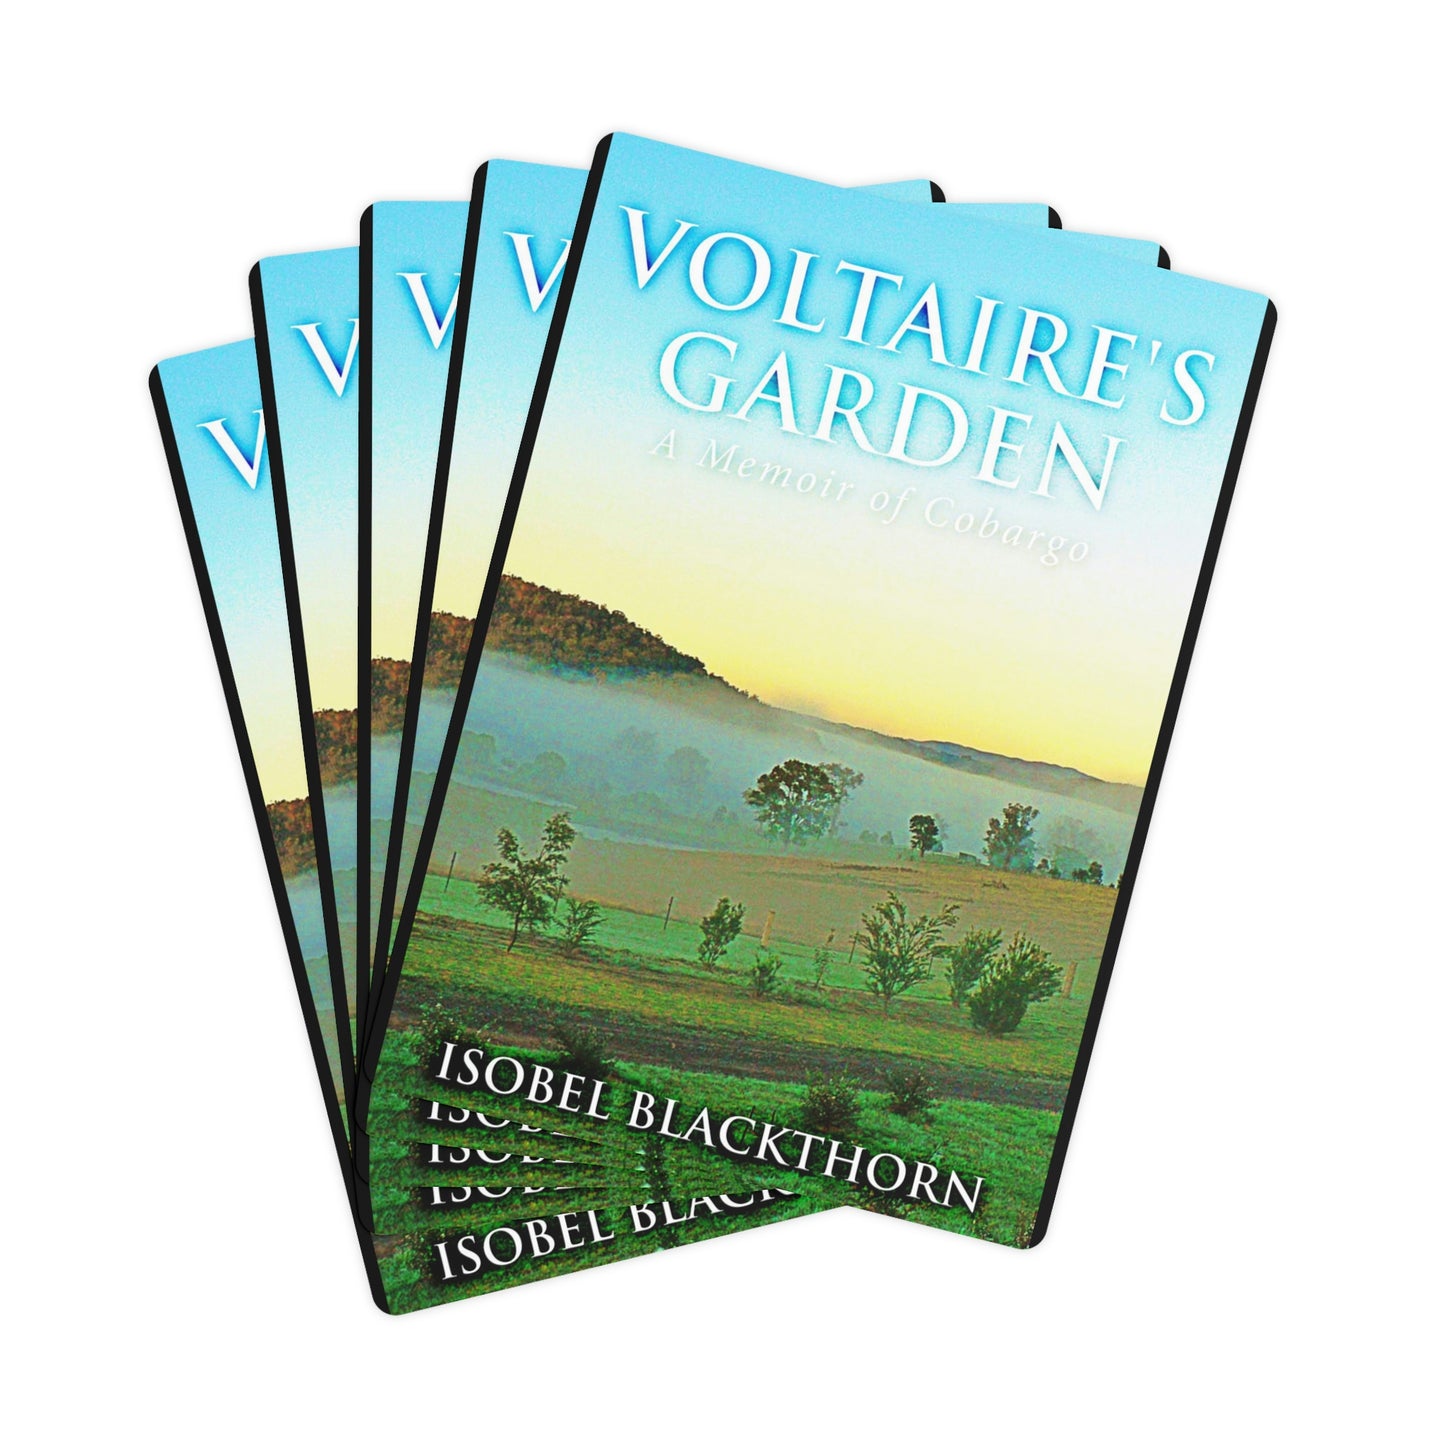 Voltaire's Garden - Playing Cards